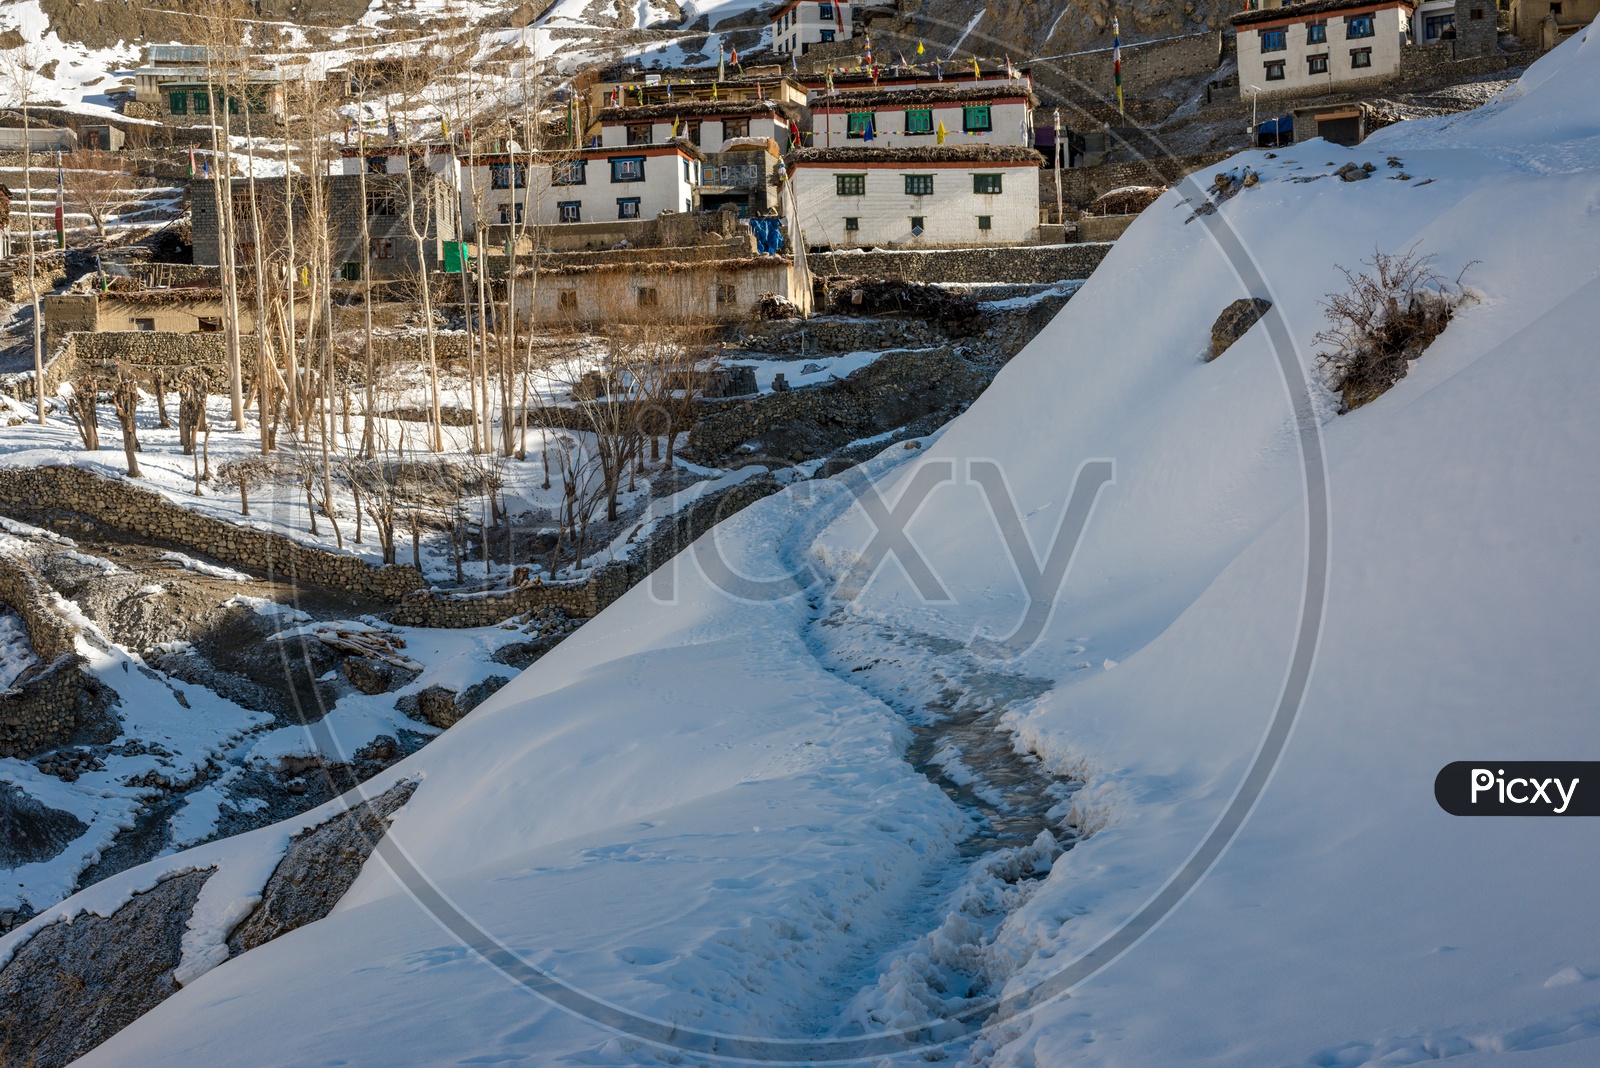 Spiti Village Houses Surrounded by Snow in Winter